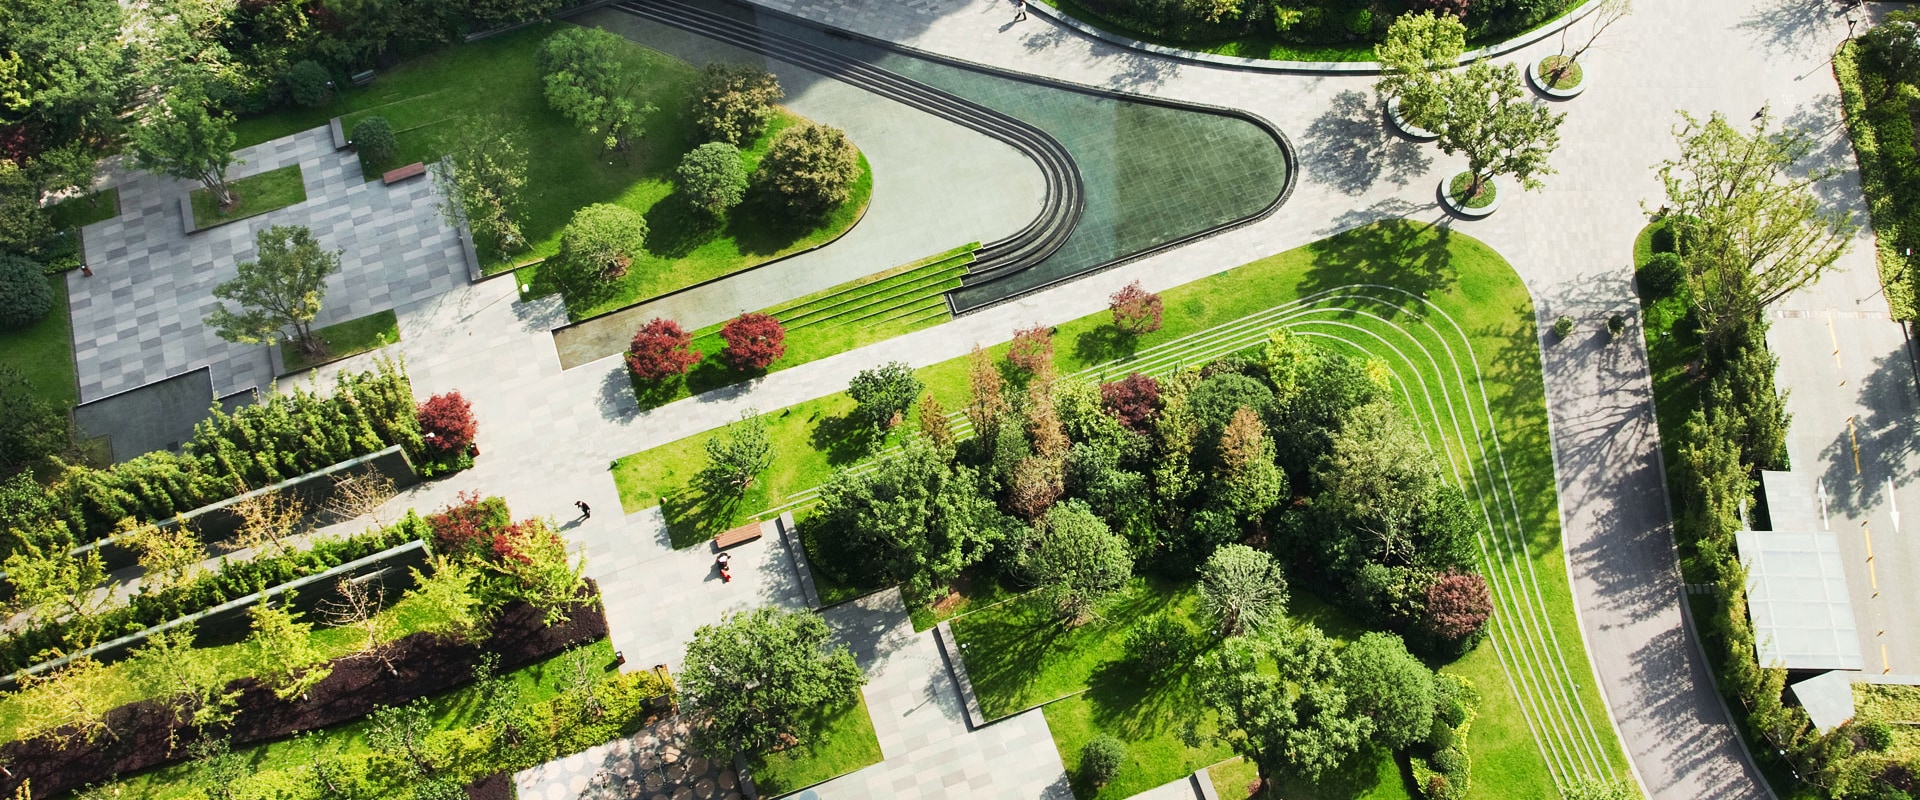 Is a landscape architect the same as an architect?